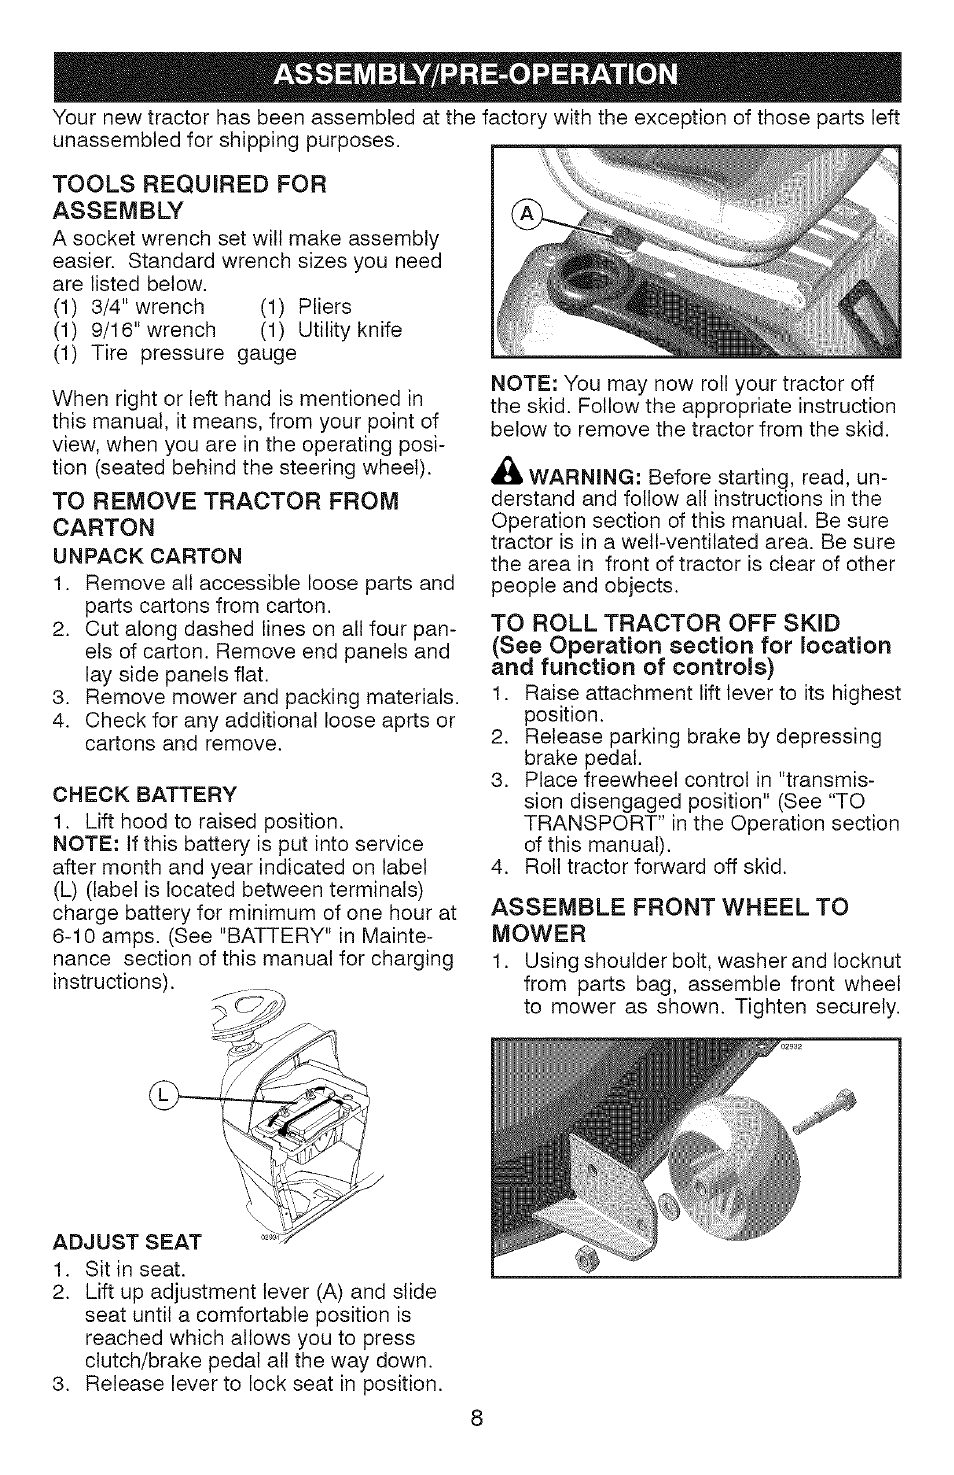 Tools required for assembly, To remove tractor from, Carton | Unpack carton, Check battery, Assemble front wheel to mower, Assembly/pre-operation | Craftsman YS 4500 917.28990 User Manual | Page 8 / 68